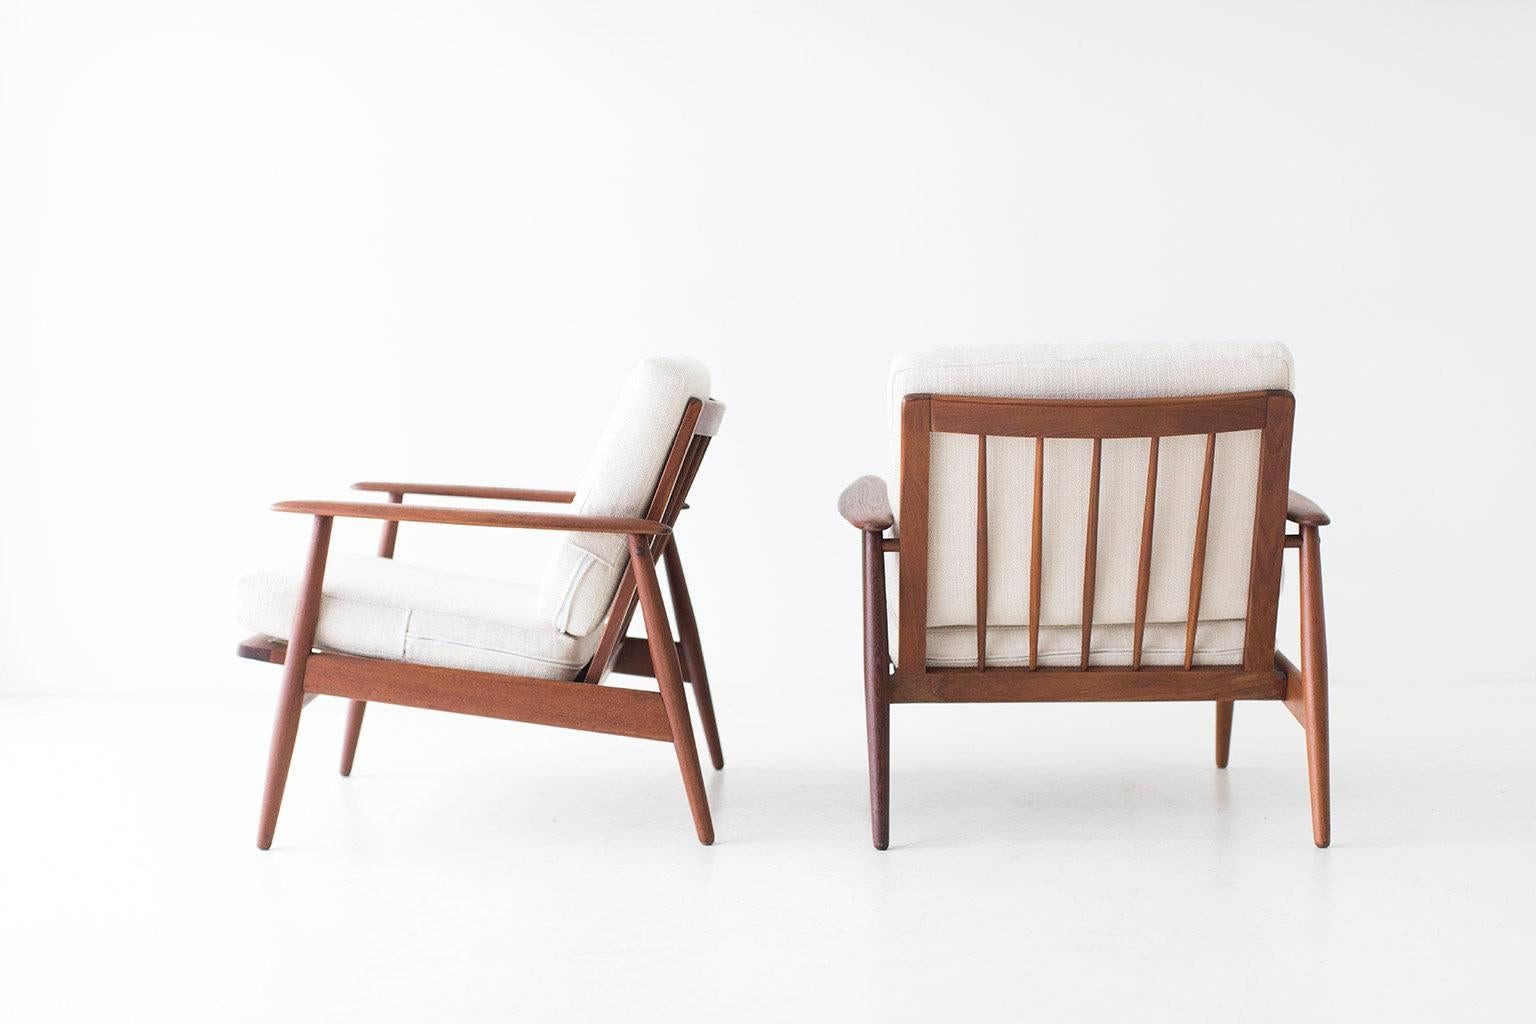 Designer: Unknown. 

Manufacturer: Moreddi. 
Period or model: Mid-Century Modern. 
Specs: African teak, thick weave polyester. 

Condition: 

These Danish teak lounge chairs for Moreddi are in excellent restored condition. The solid teak